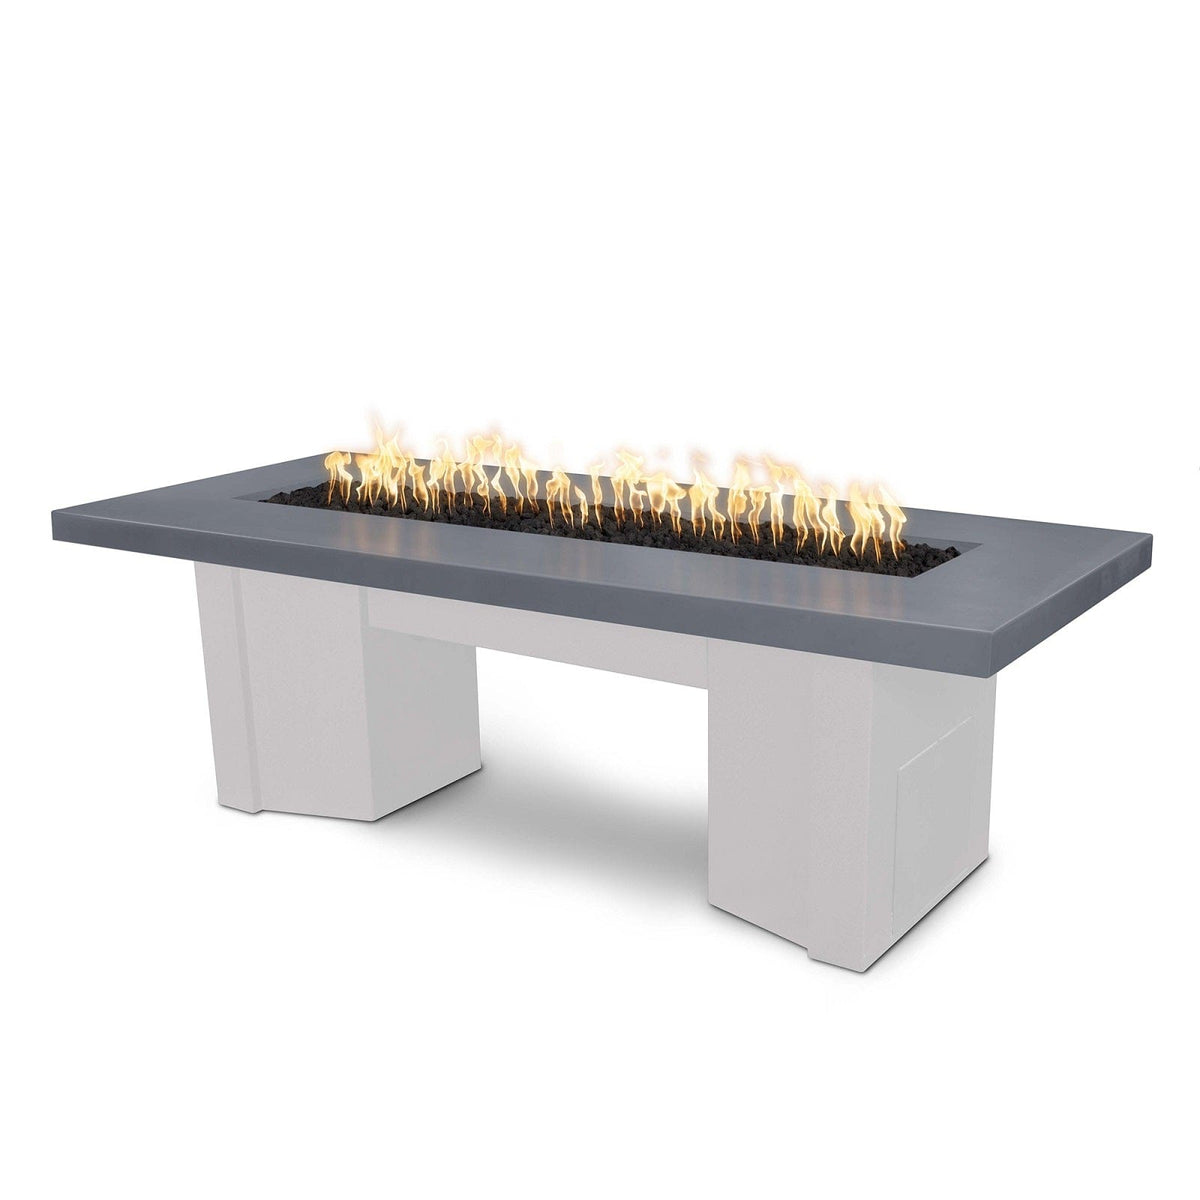 The Outdoor Plus Fire Features Gray (-GRY) / White Powder Coated Steel (-WHT) The Outdoor Plus 60&quot; Alameda Fire Table Smooth Concrete in Liquid Propane - Flame Sense System with Push Button Spark Igniter / OPT-ALMGFRC60FSEN-LP